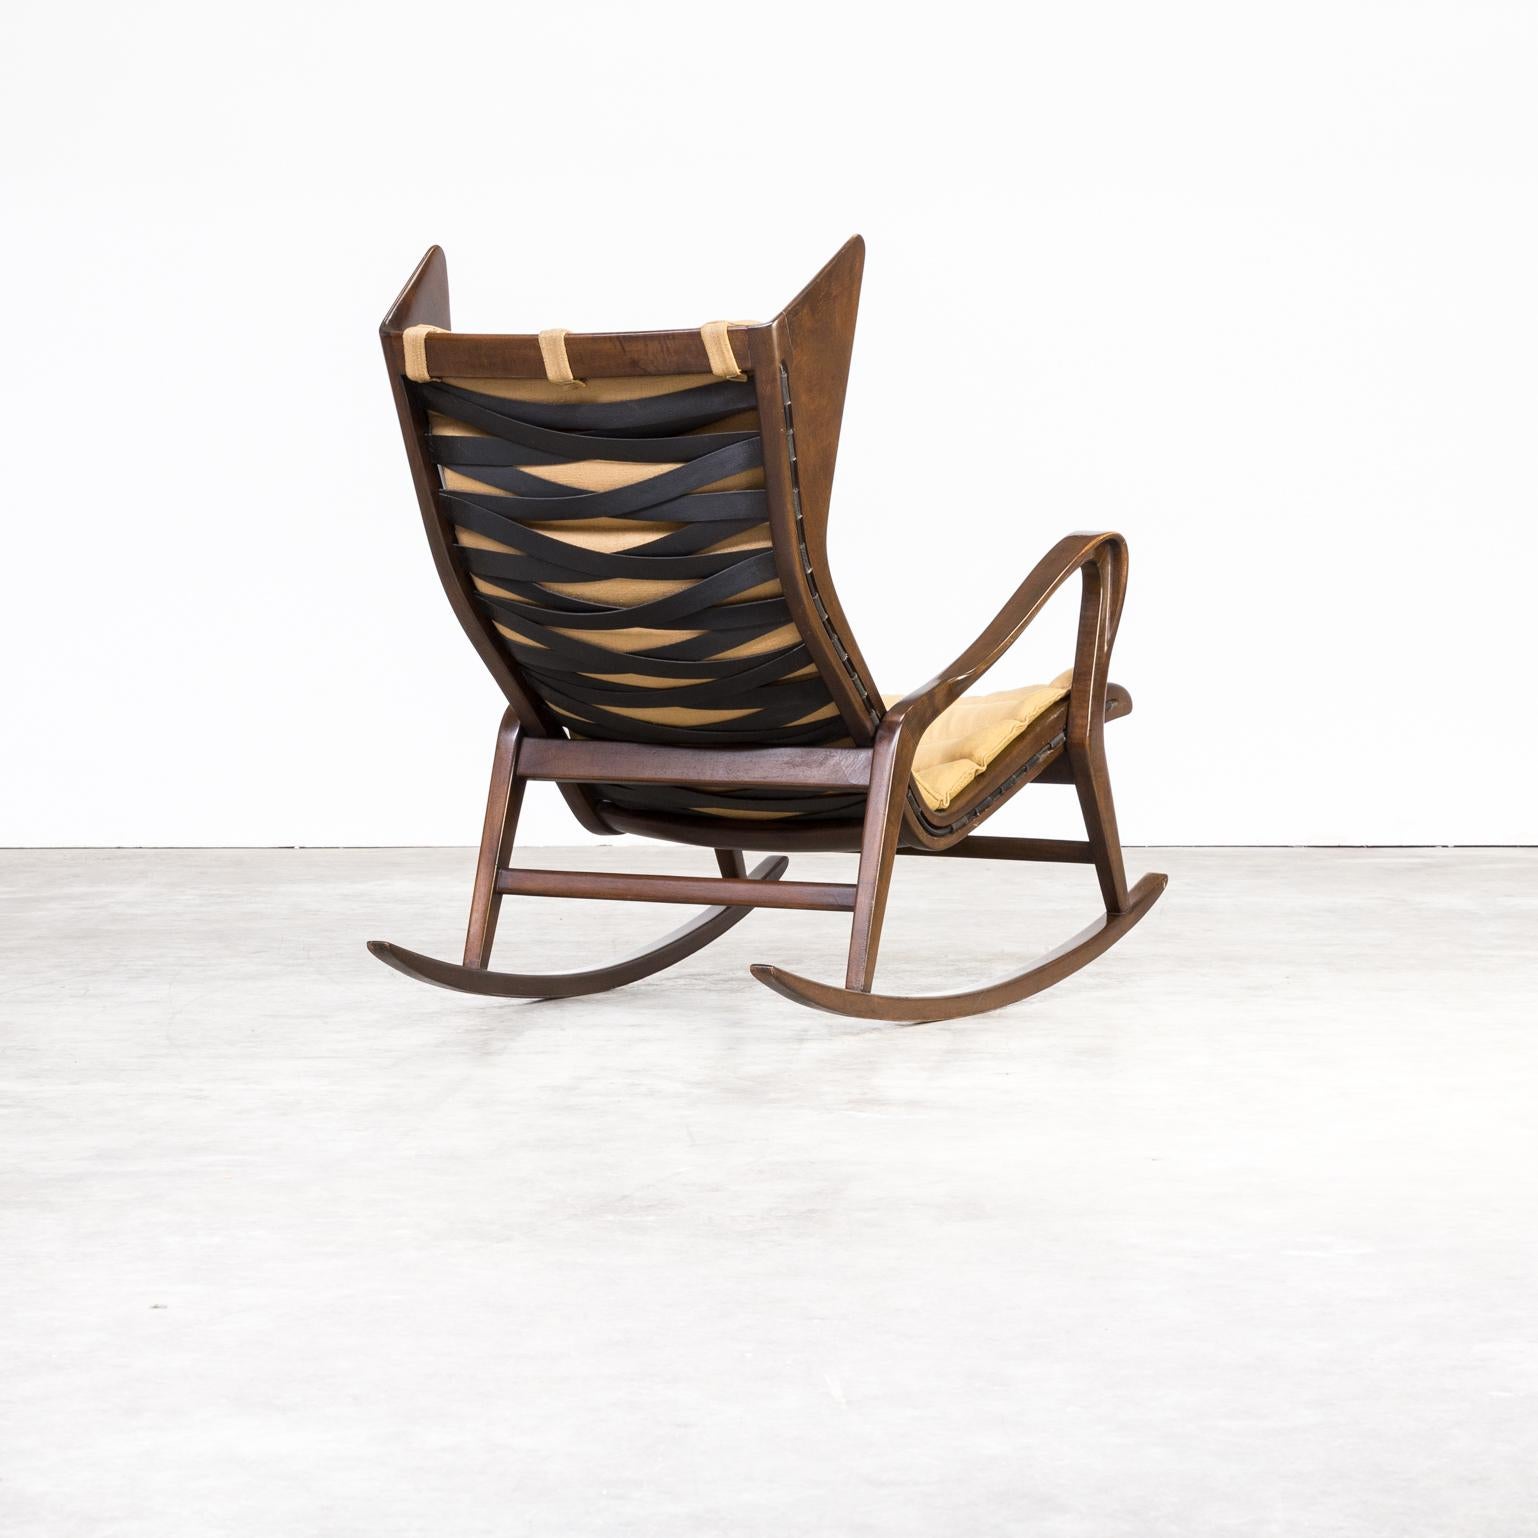 Italian 1950s Gio Ponti, attributed, Model 572 Rocking Chair for Cassina For Sale